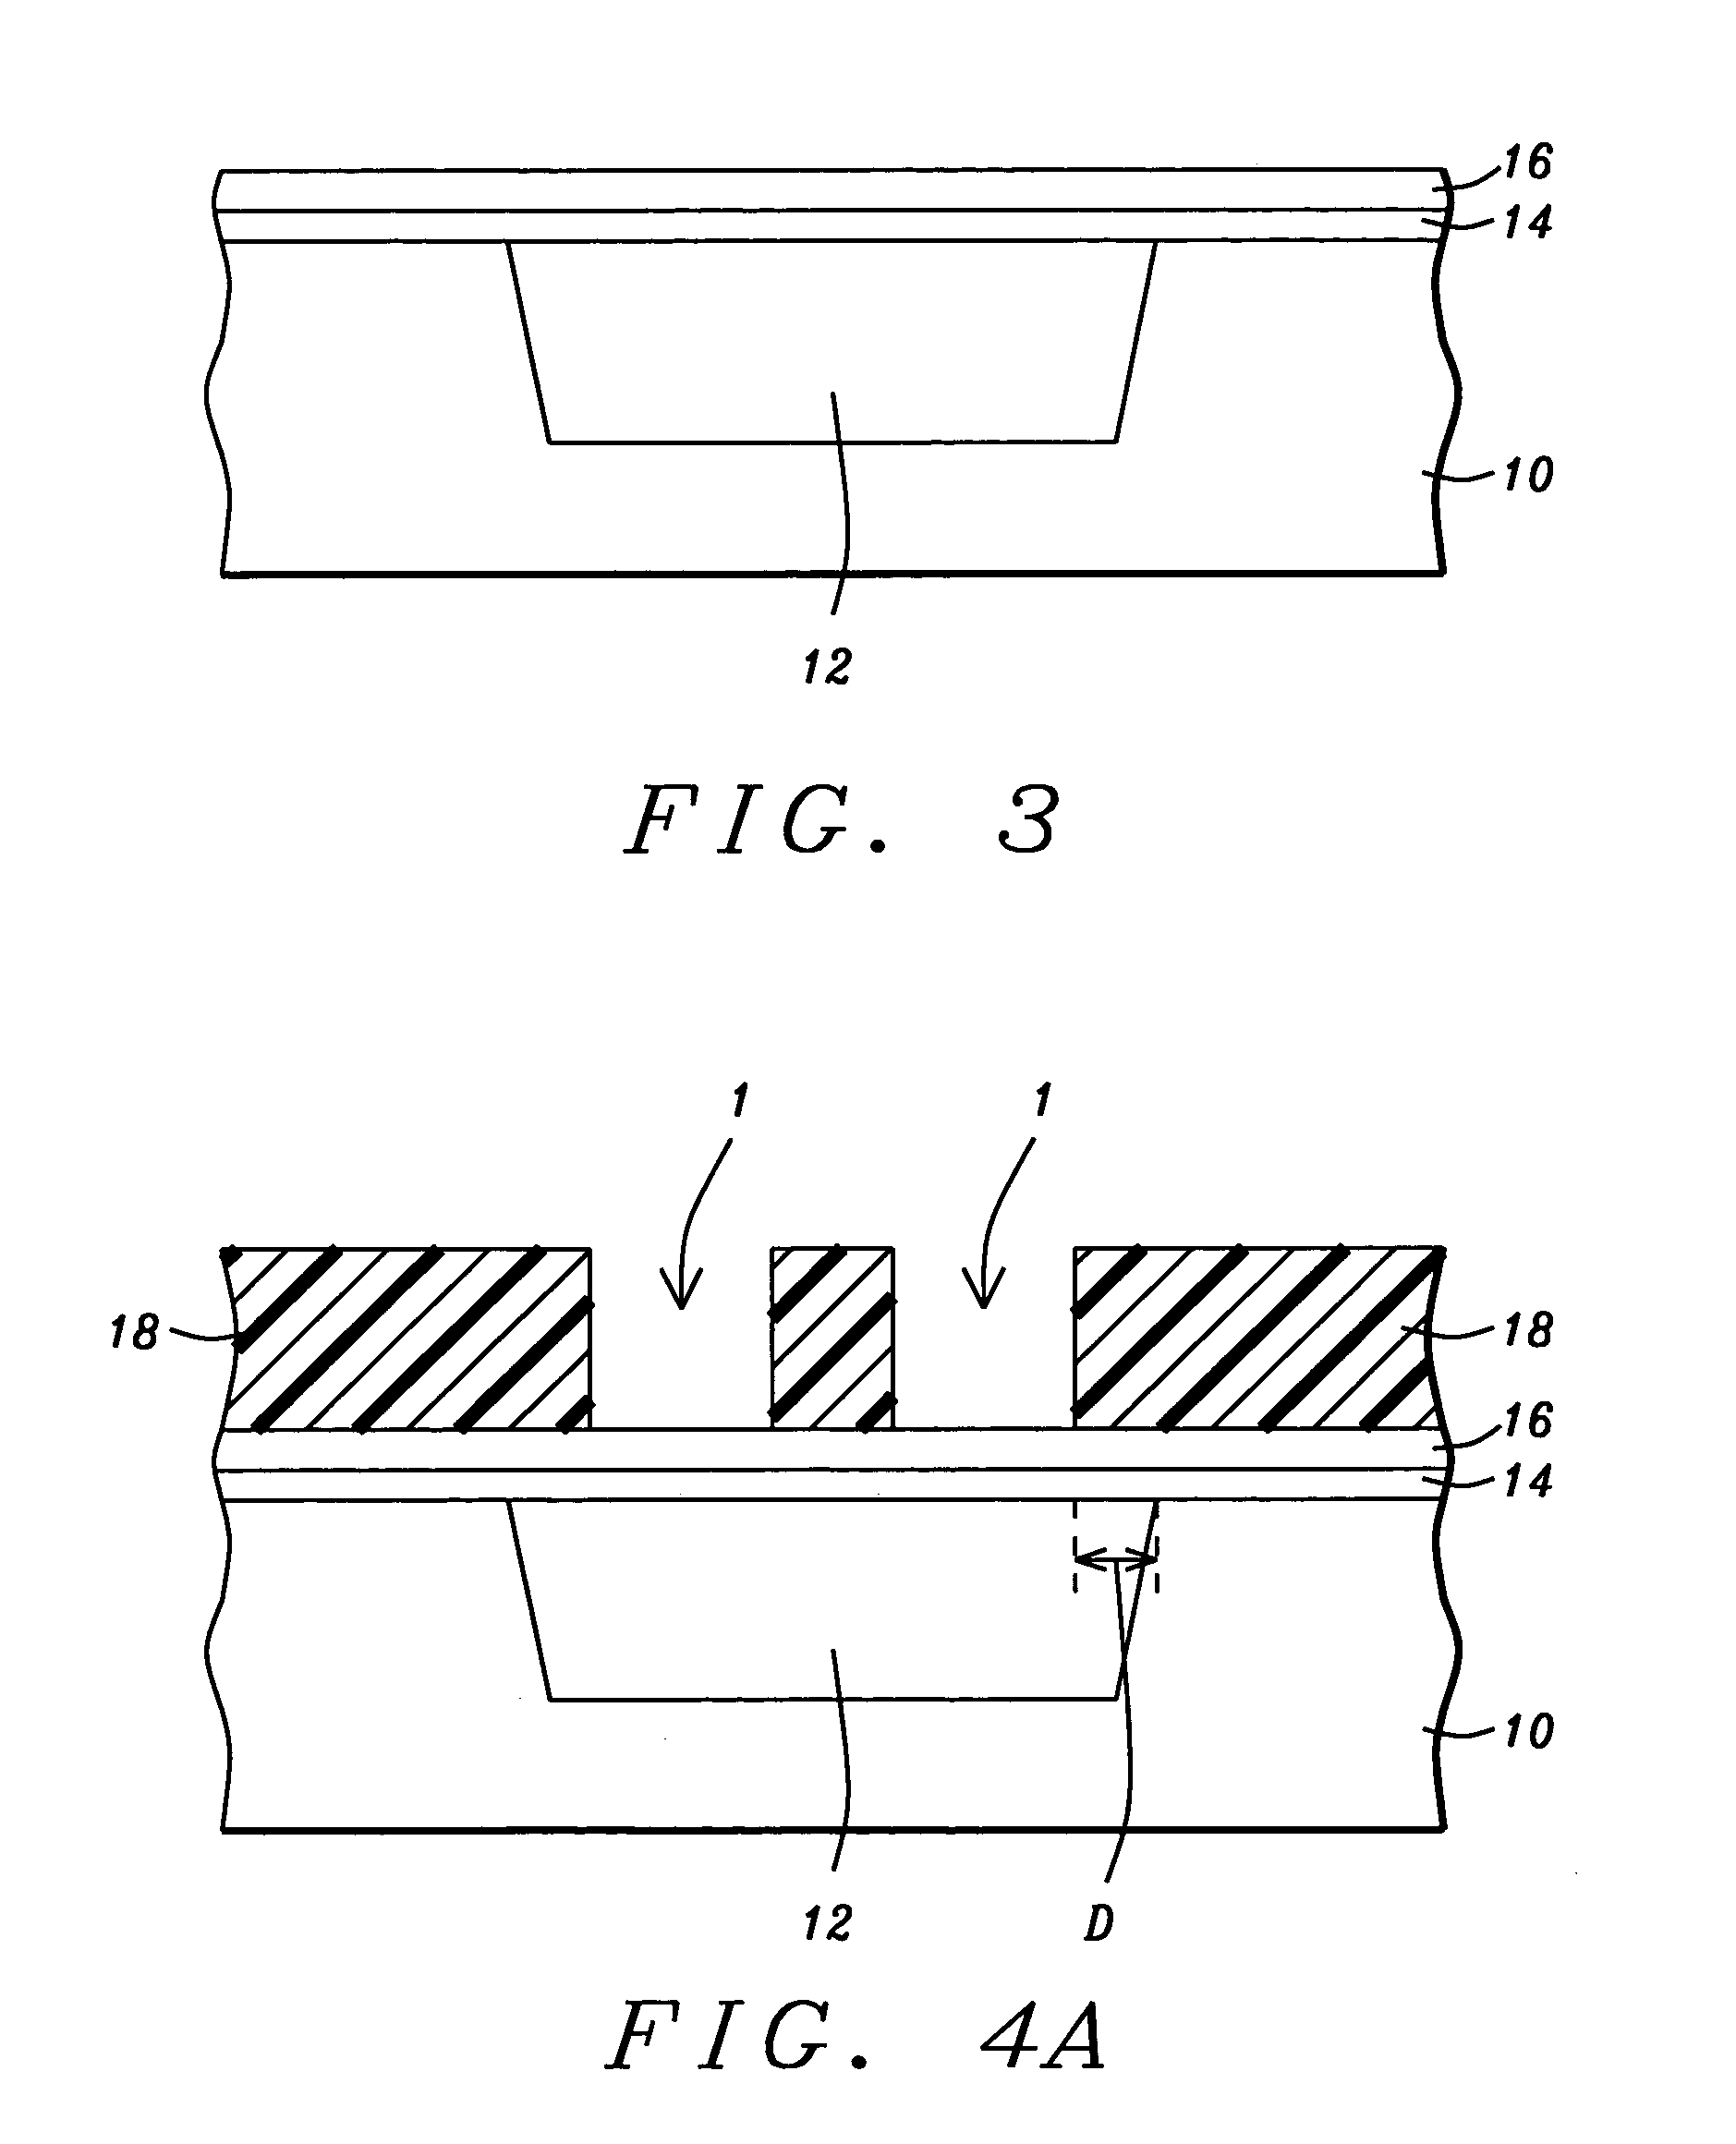 Random access memory (RAM) capacitor in shallow trench isolation with improved electrical isolation to overlying gate electrodes